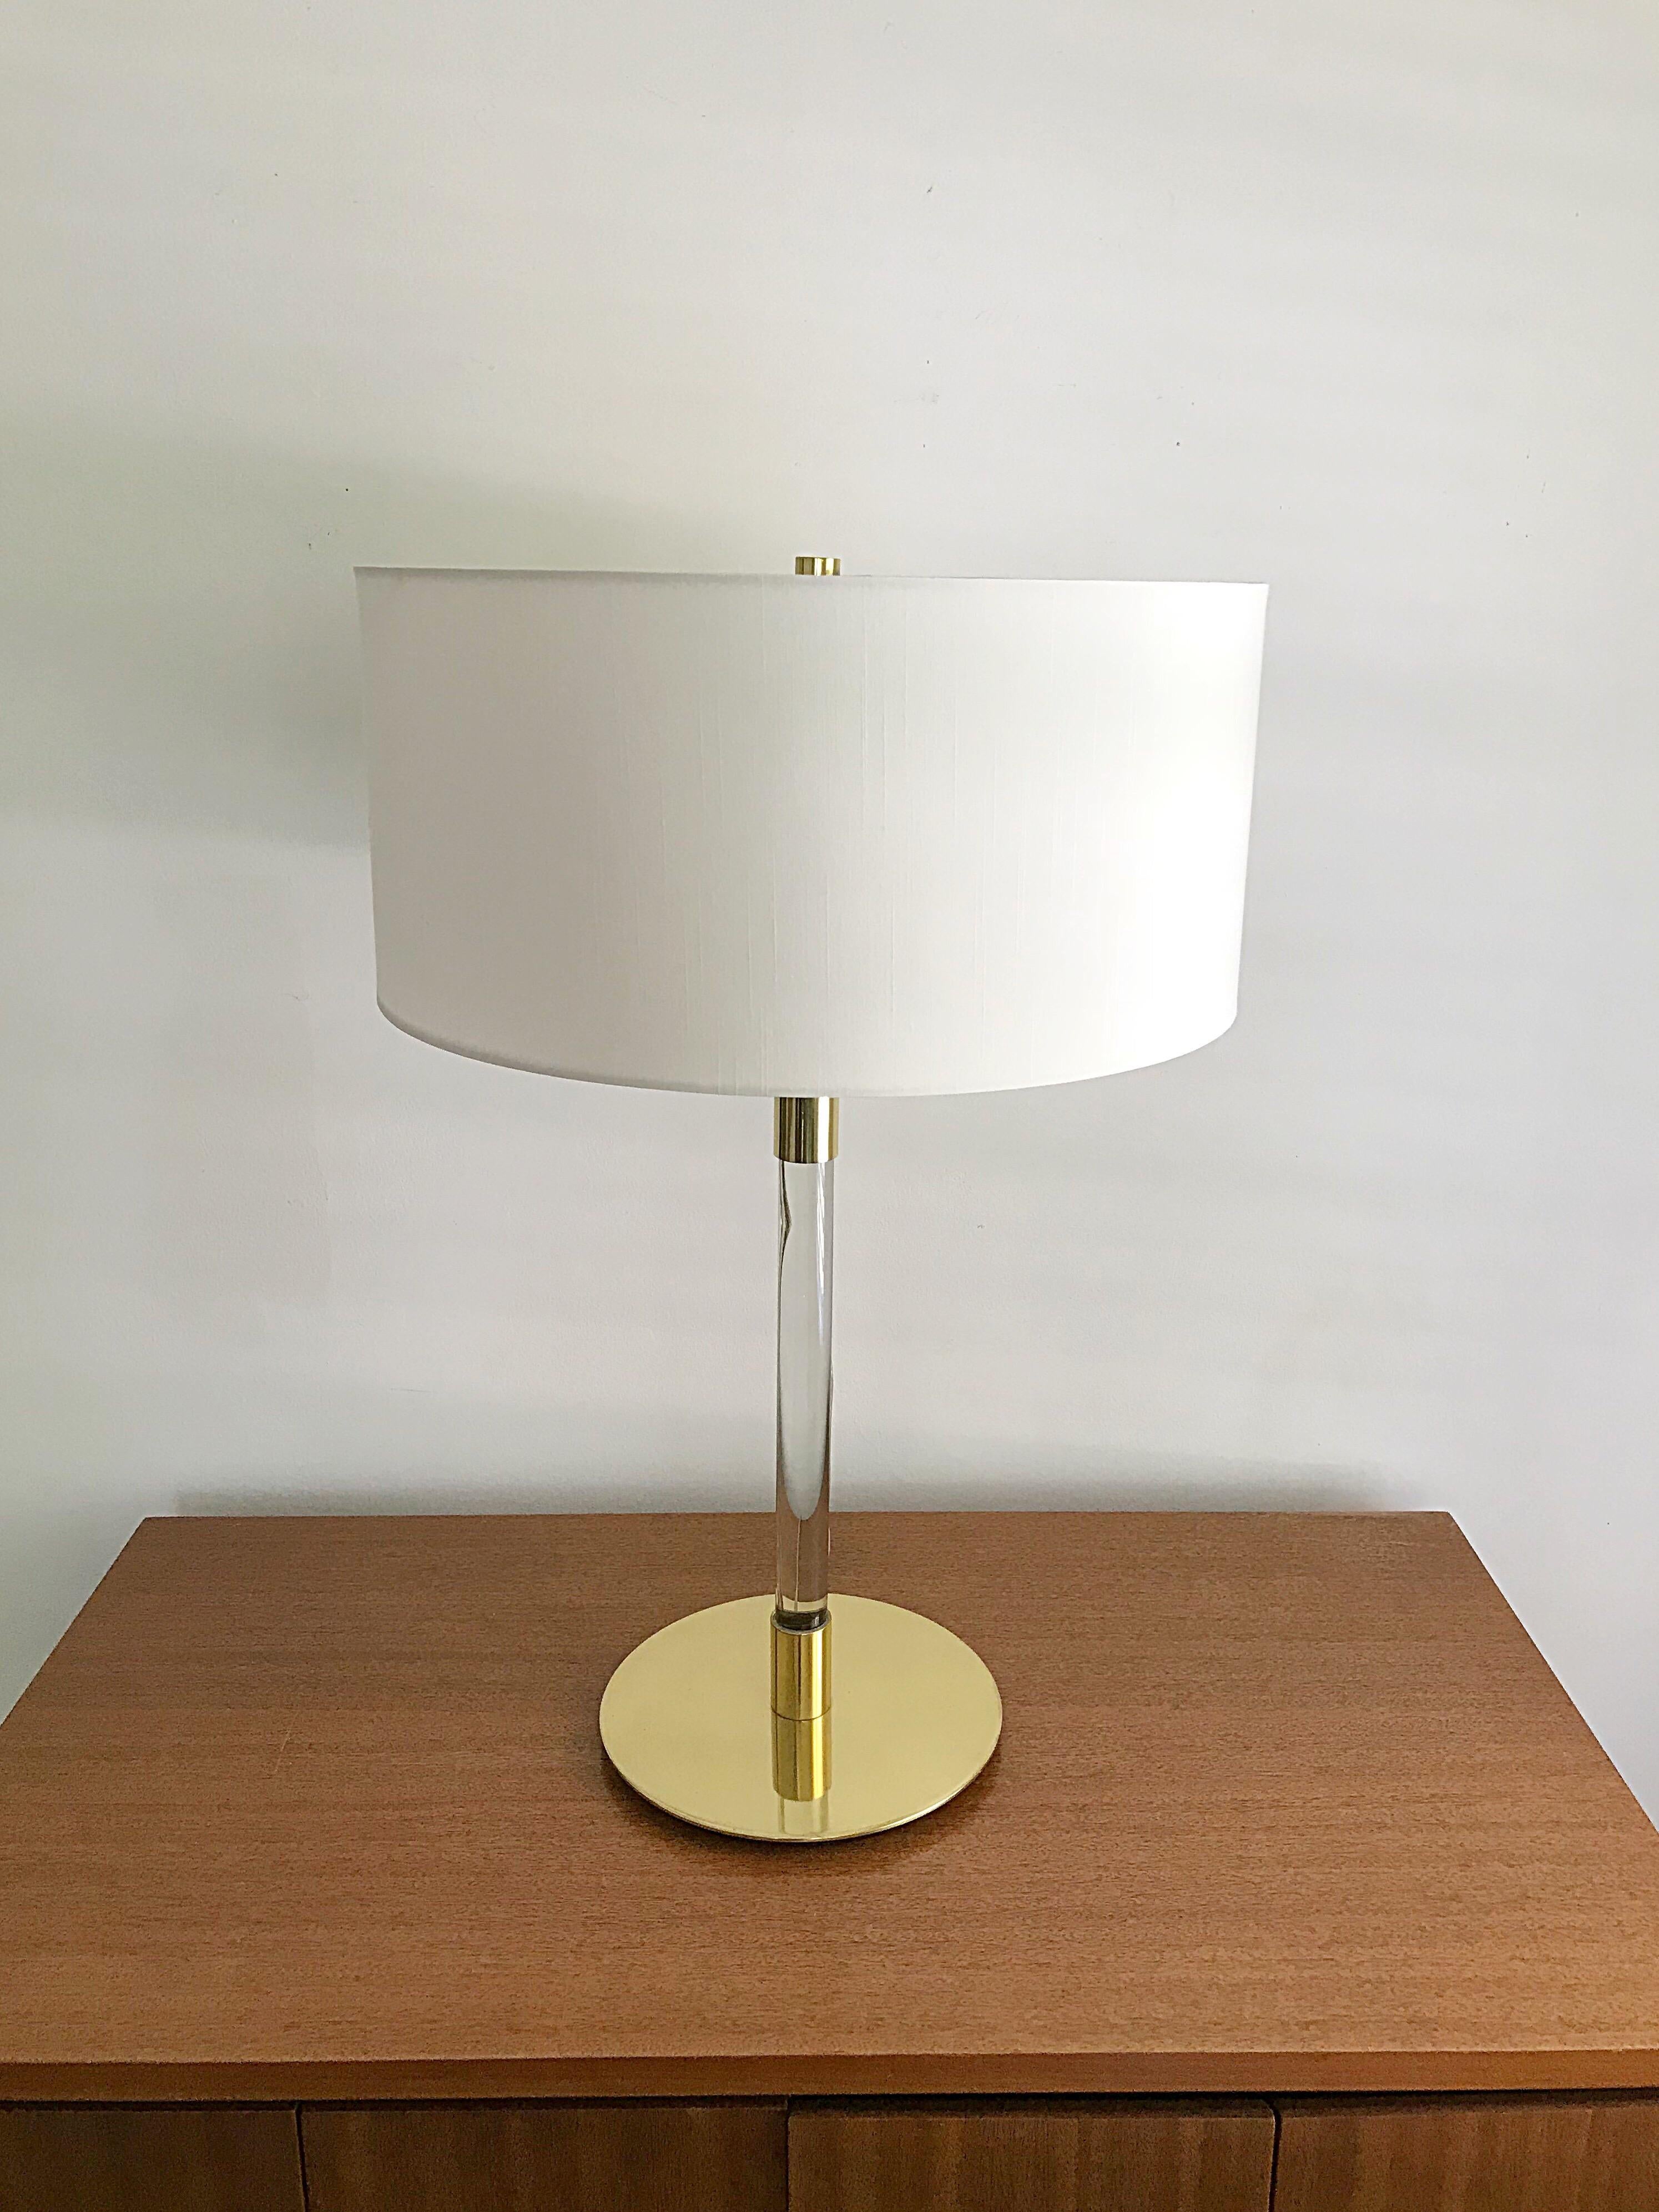 A brass lamp with a glass column by Hansen Lamps / New York. The lamp was manufactured by METALARTE and Made In Spain. There is a bulb switch and a switch on the cord which is all original and in very good condition. The lamp is designed such that